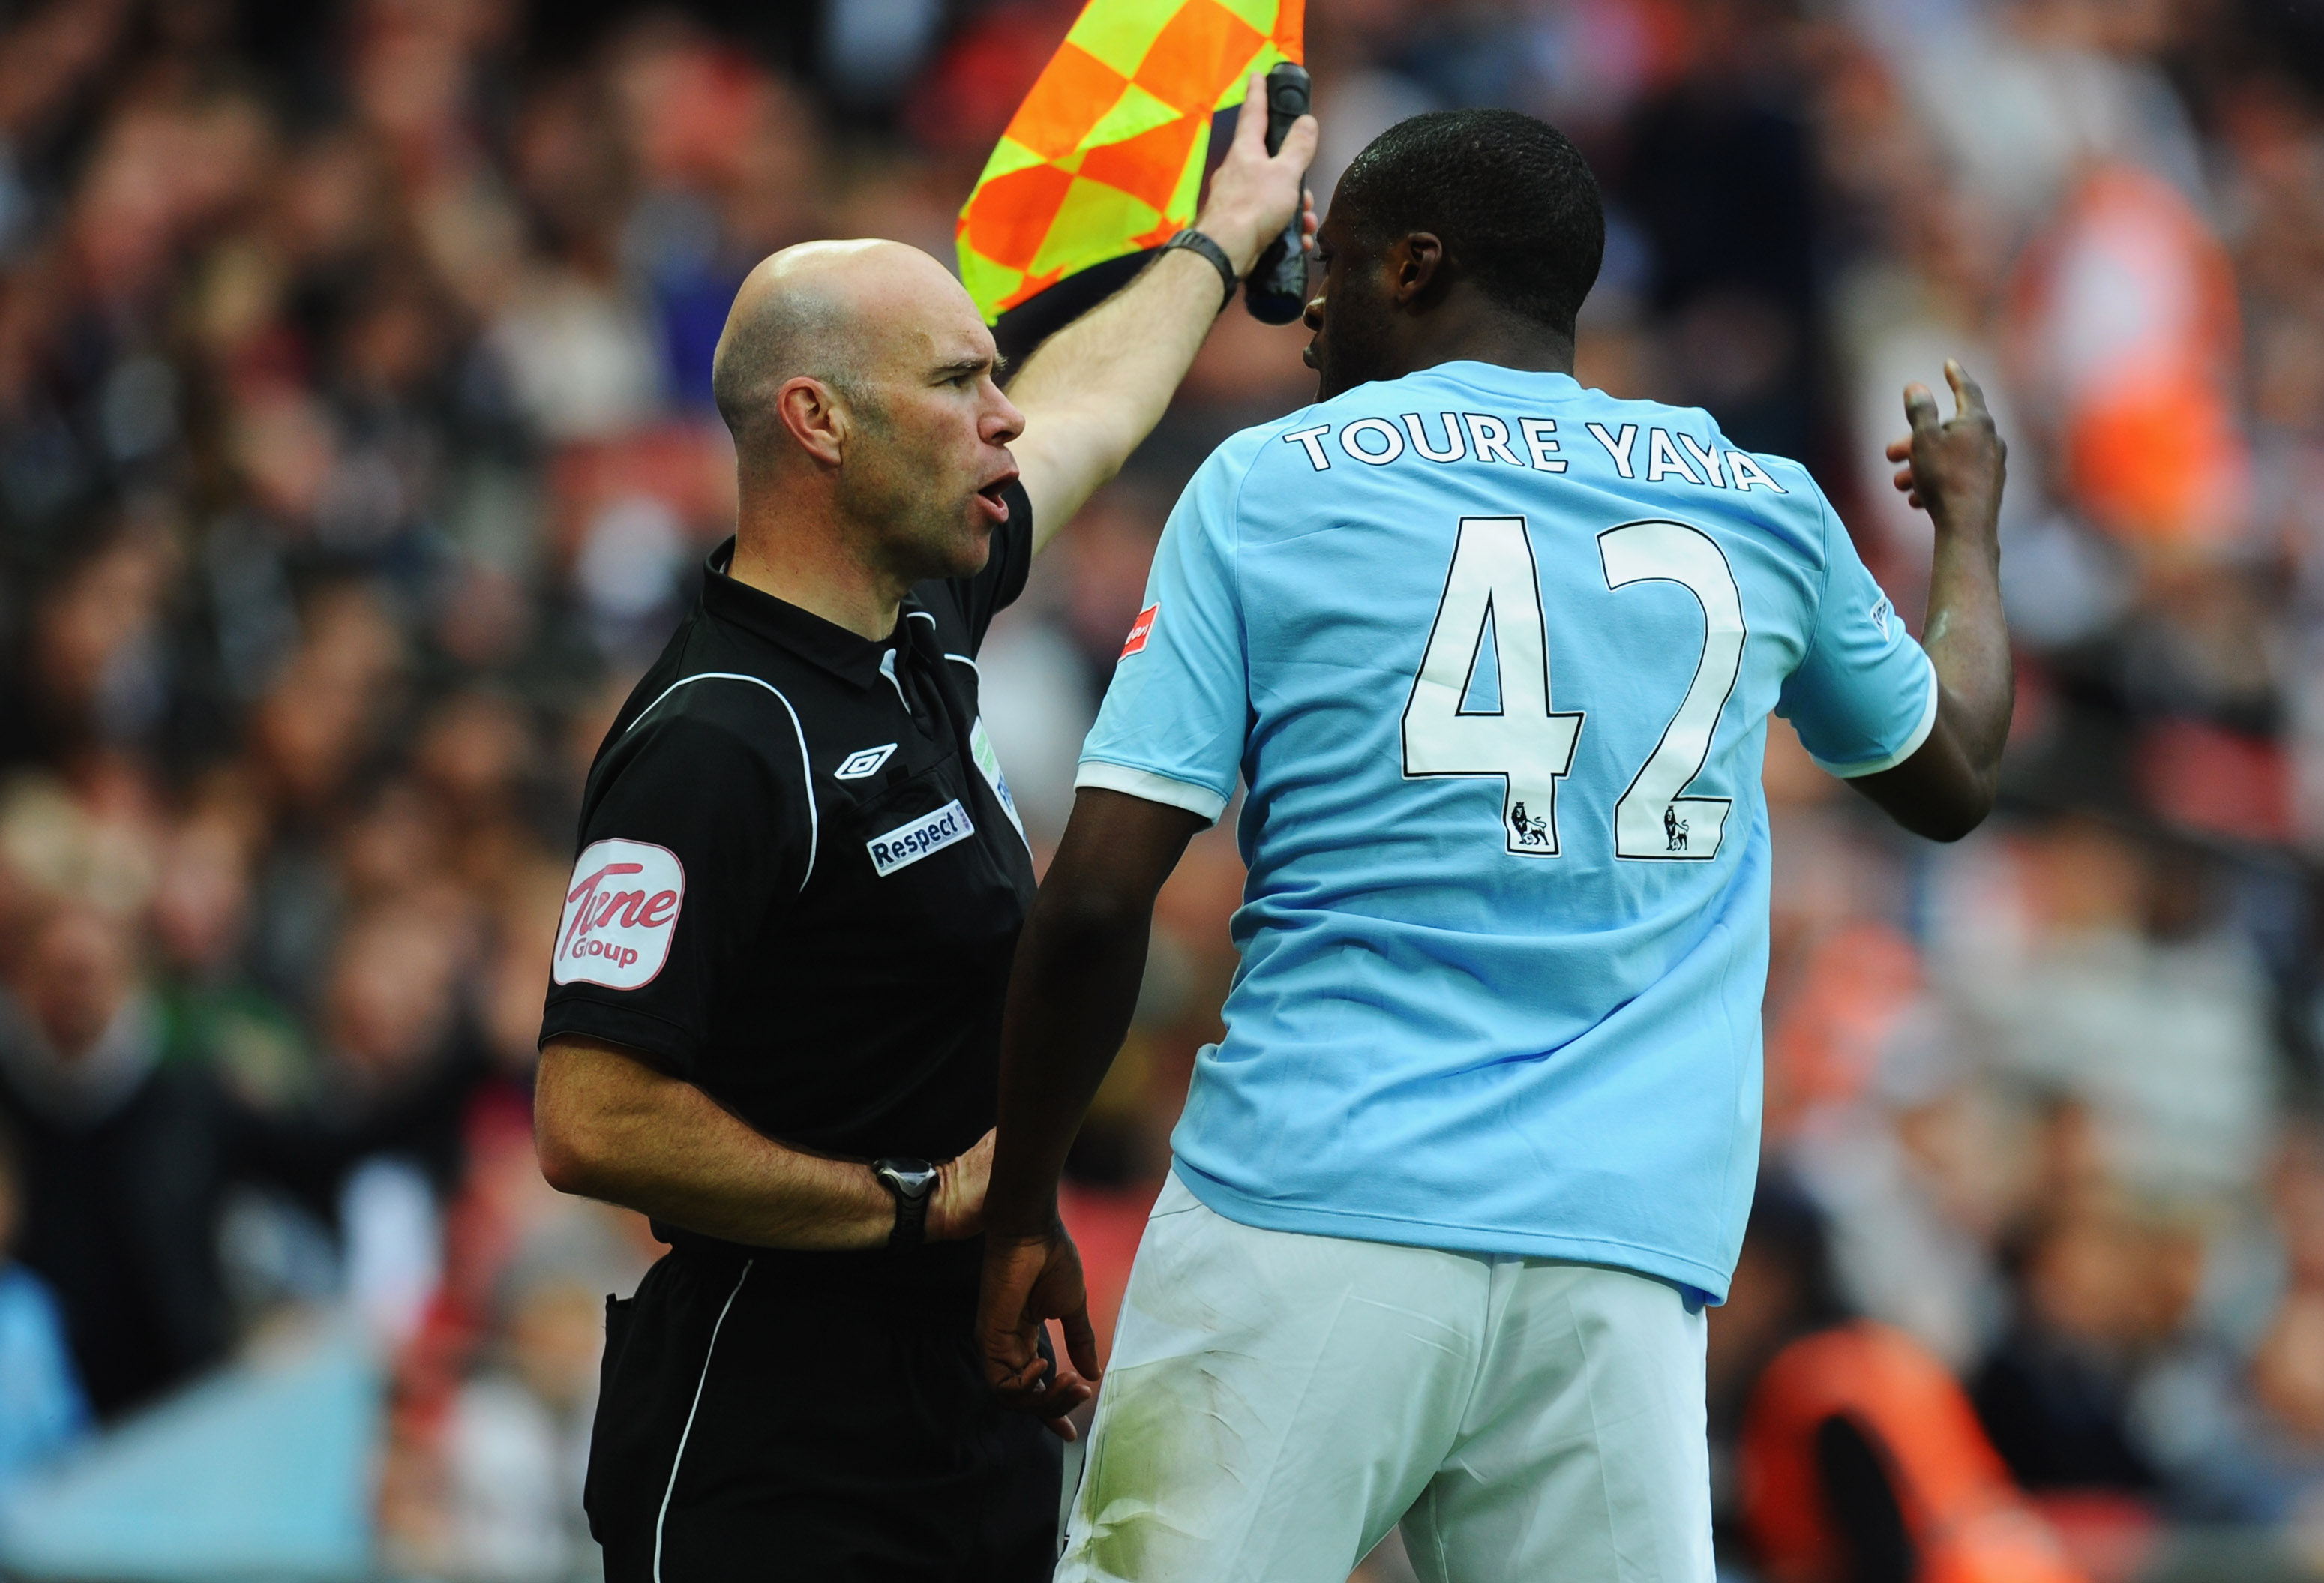 LONDON, ENGLAND - APRIL 16:  Yaya Toure of Manchester City argues with the assistant referee during the FA Cup sponsored by E.ON semi final match between Manchester City and Manchester United at Wembley Stadium on April 16, 2011 in London, England.  (Phot